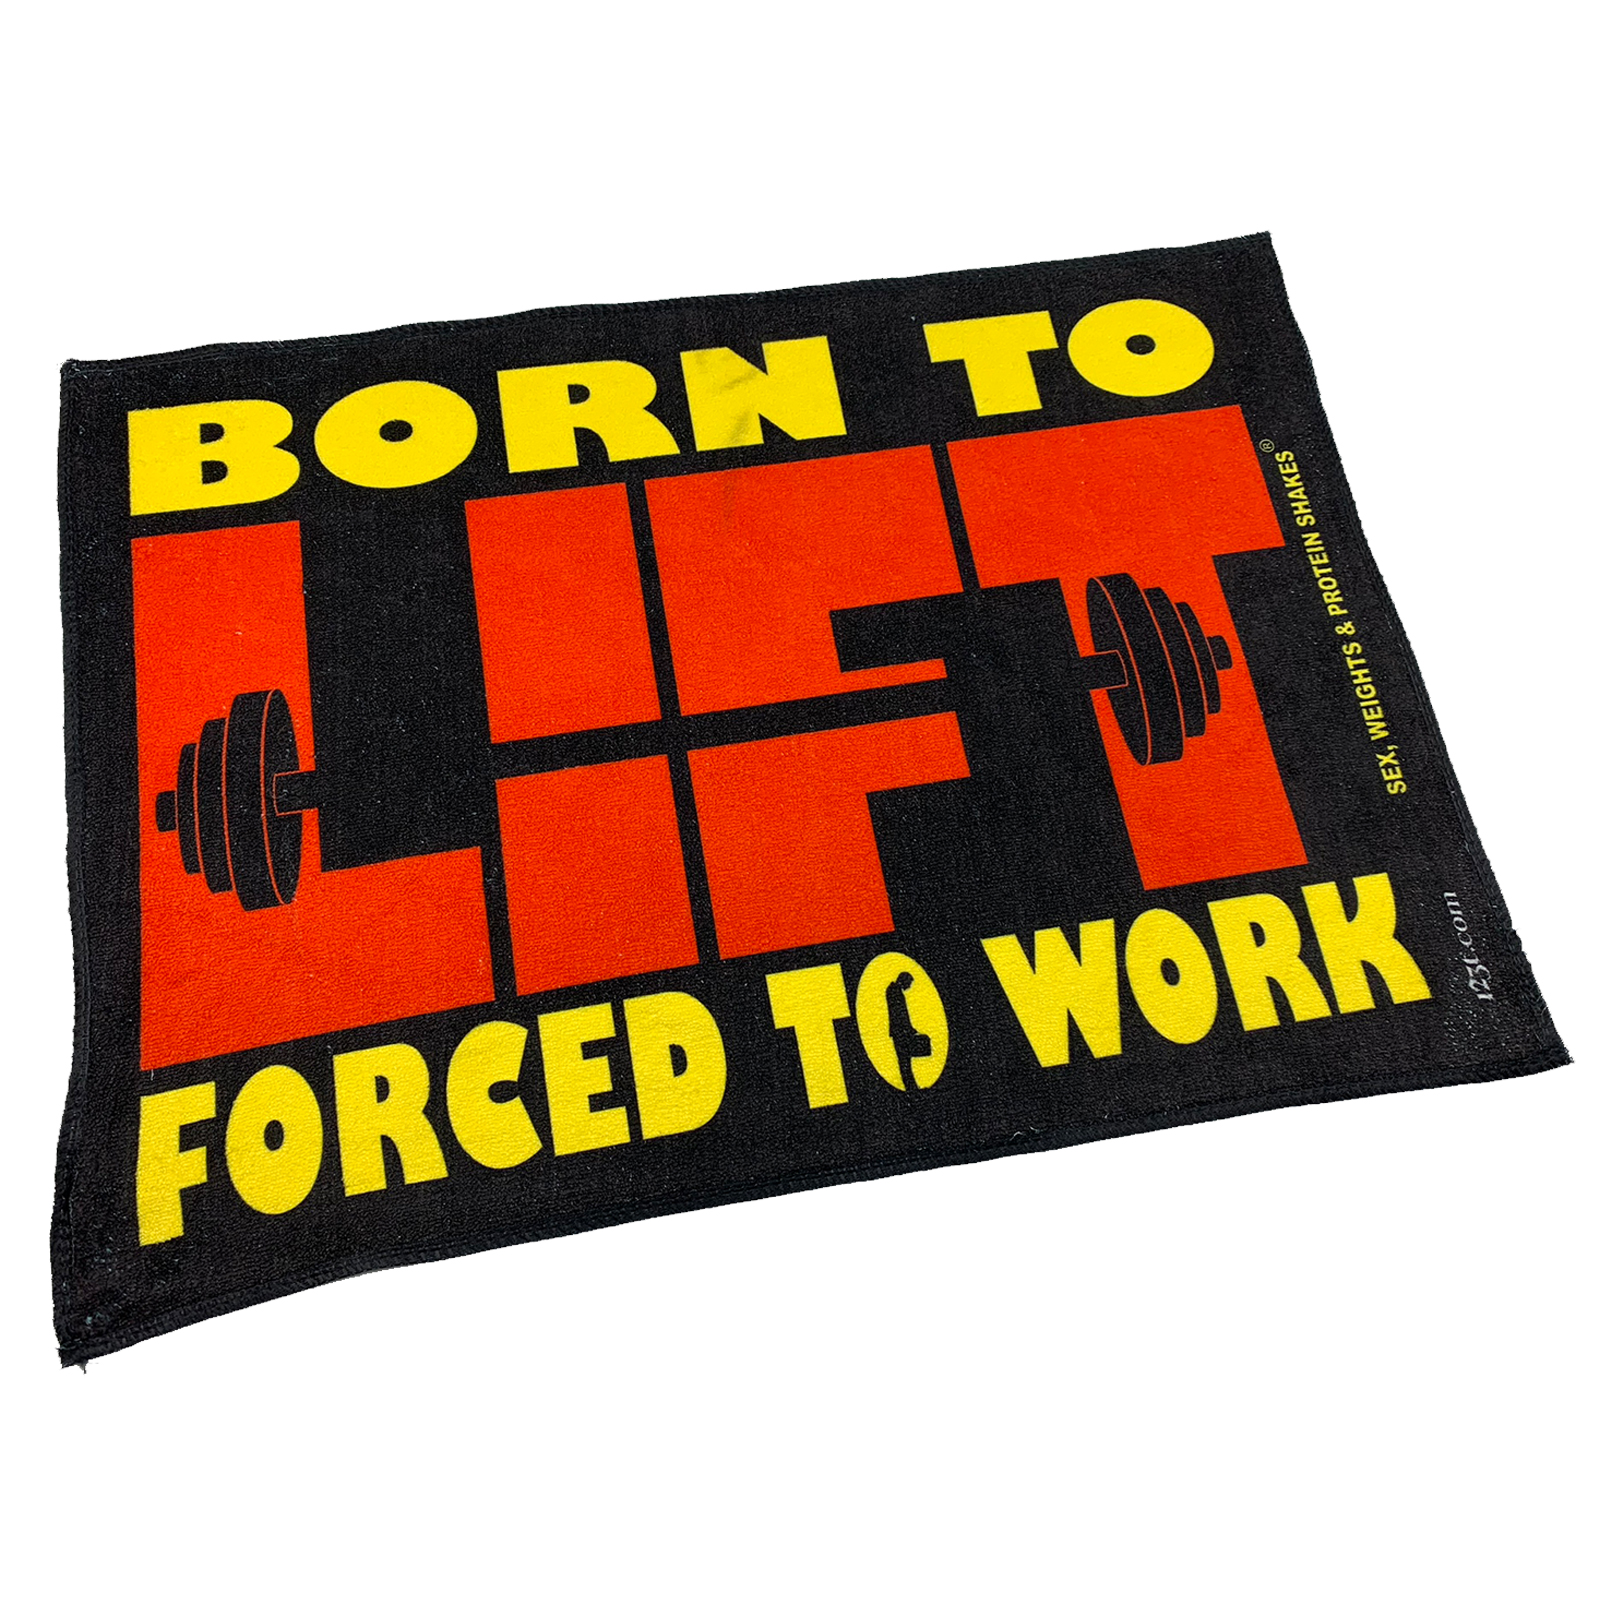 Born To Run Forced To Work Gym Sweat Microfiber Sports Towel Jogging Funny